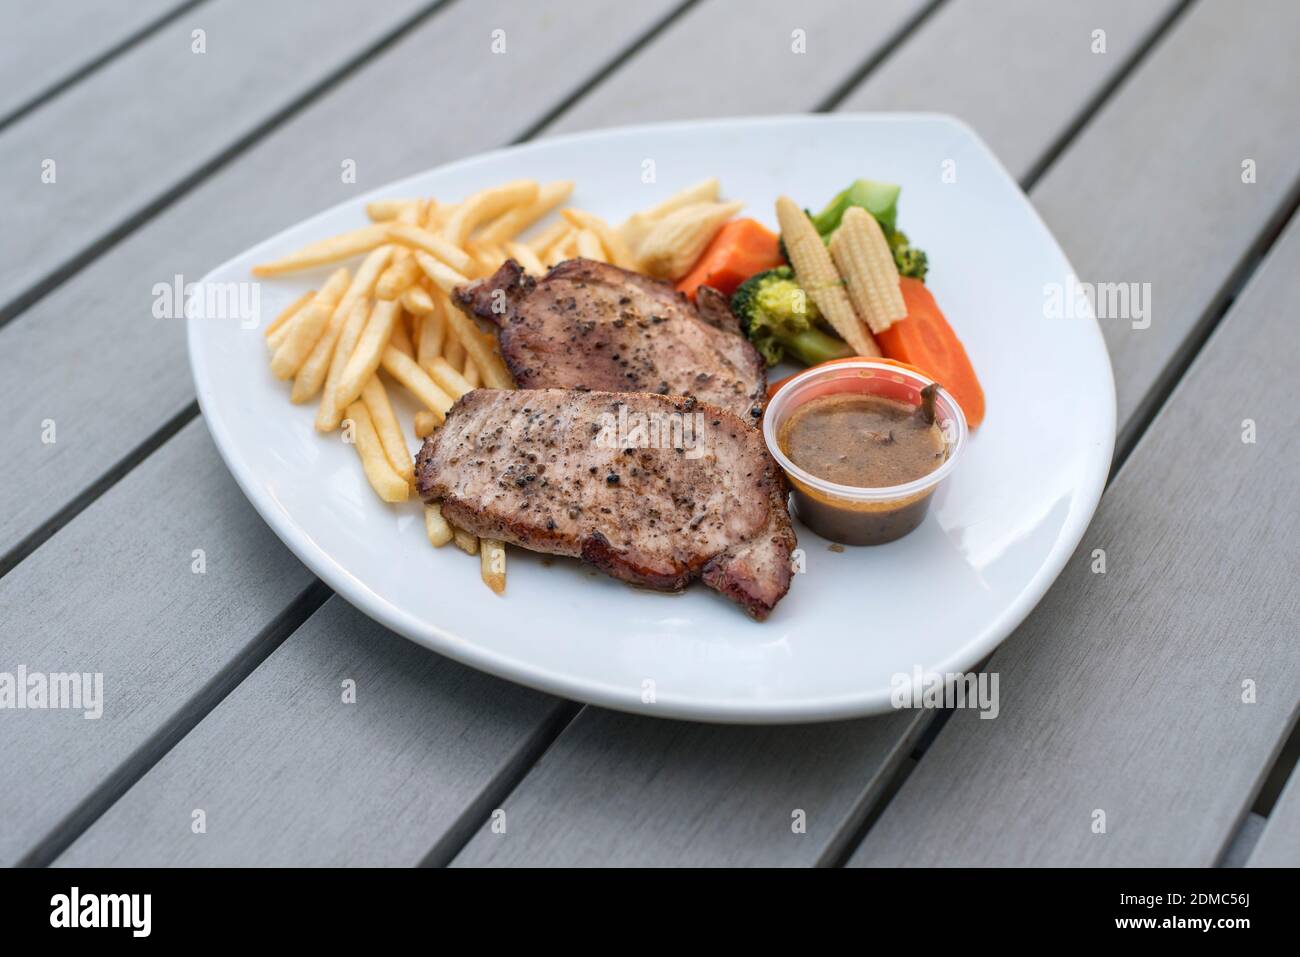 High Angle View Of Food Served In Plate On Table Stock Photo